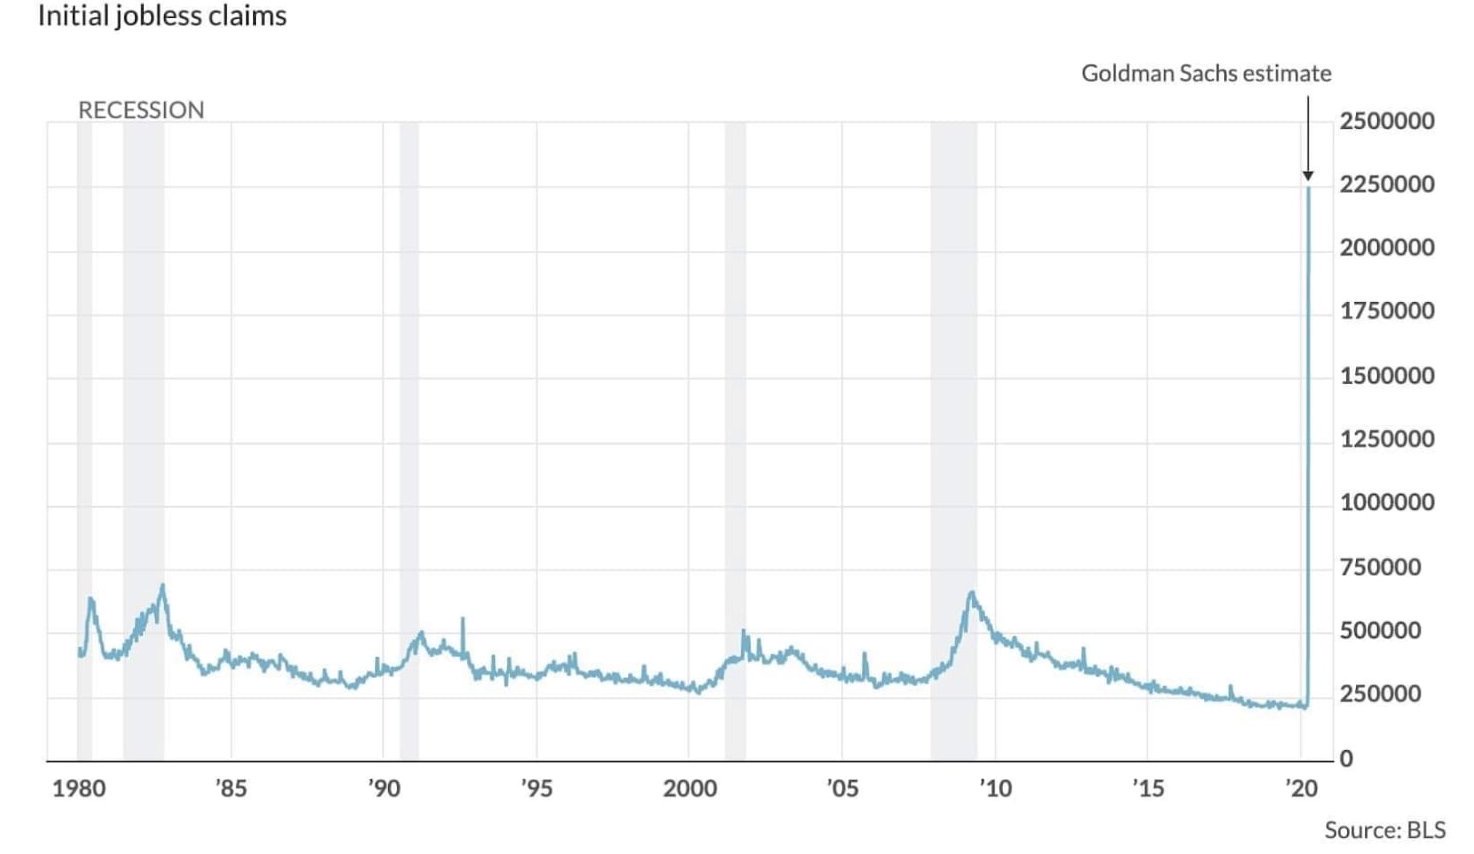 Estimated initial jobless claims 2020 due to coronavirus recession